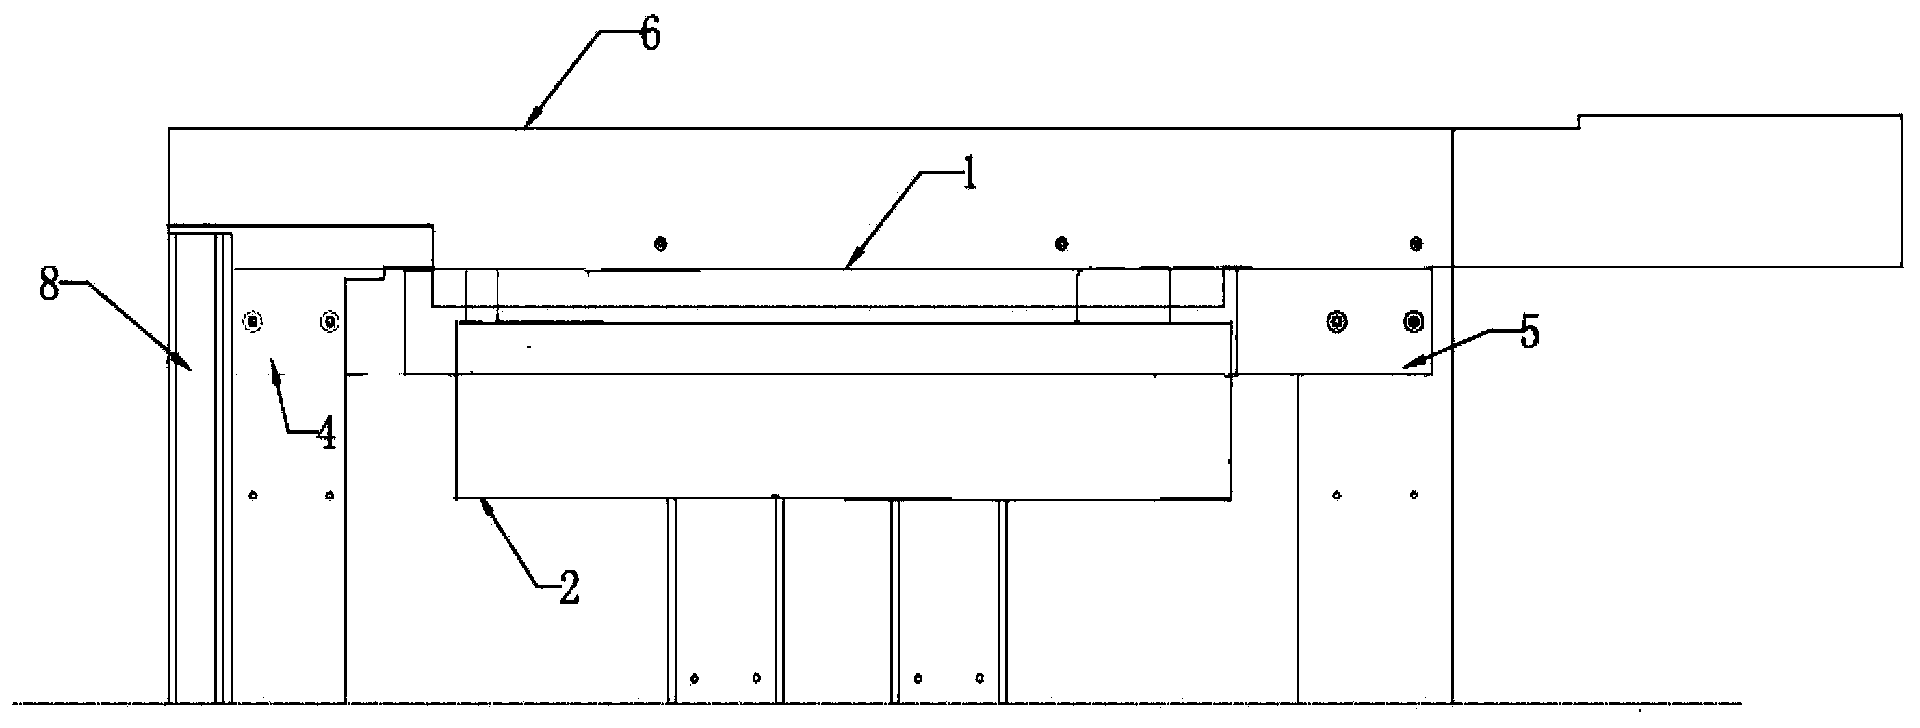 Mechanism for achieving function of cutting while walking of automatic cutting machine